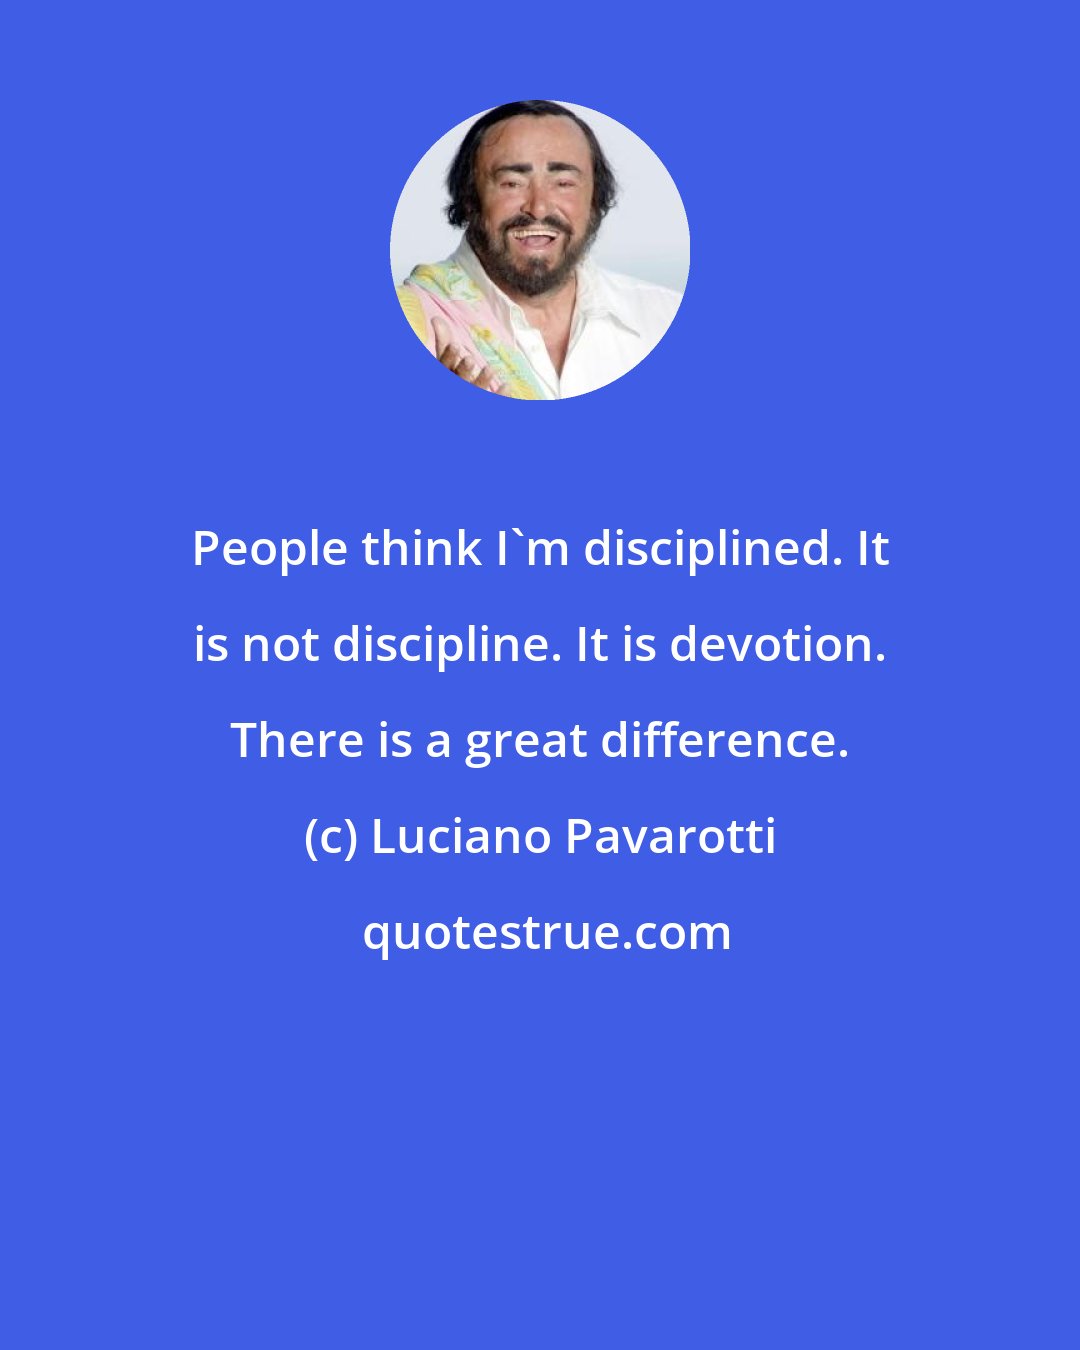 Luciano Pavarotti: People think I'm disciplined. It is not discipline. It is devotion. There is a great difference.